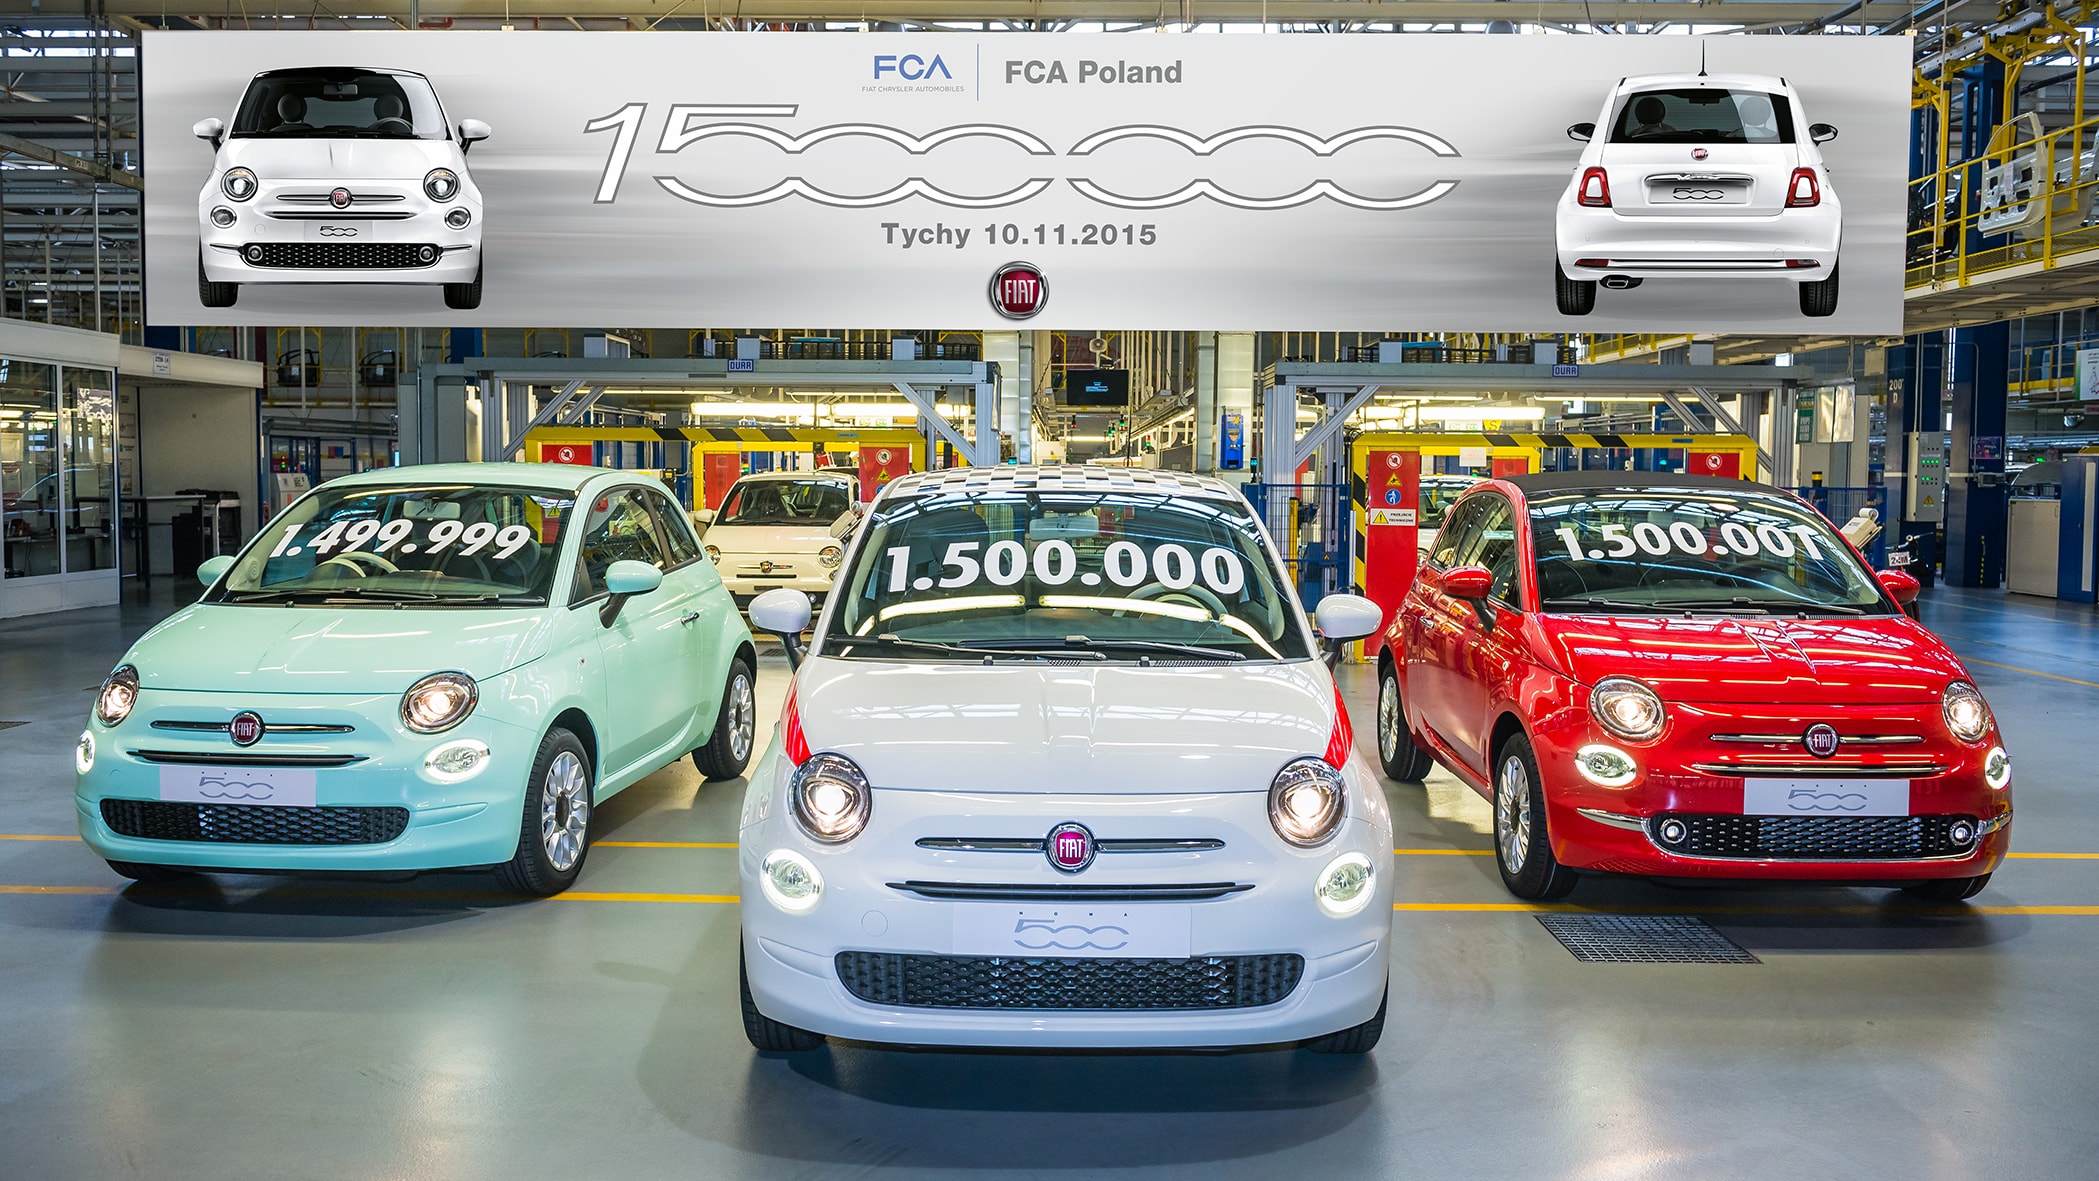 Fiat 500 Production Reaches 1,5 Million Milestone at Tychy